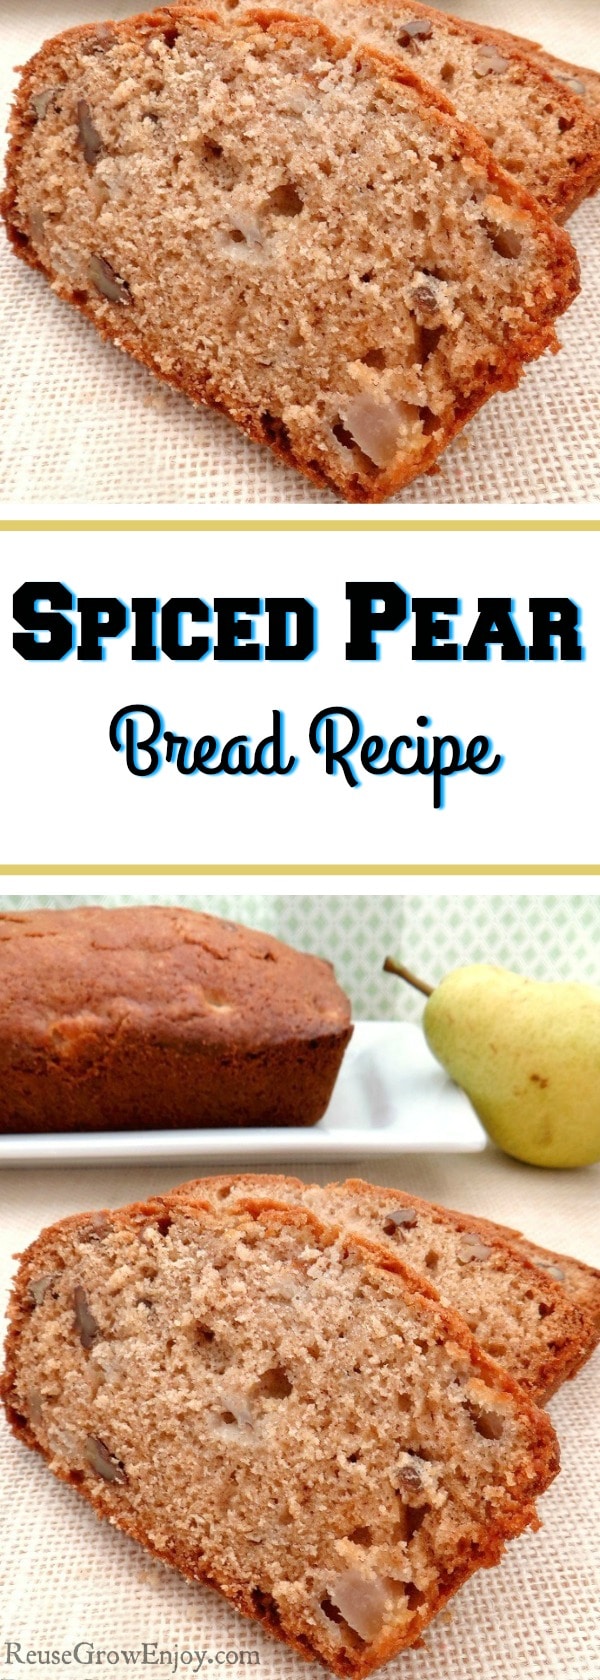 If you like a good bread recipe, I have one for you to try. It is a yummy spiced pear bread recipe. It is great any time of year but I love making it best as a fall recipe!